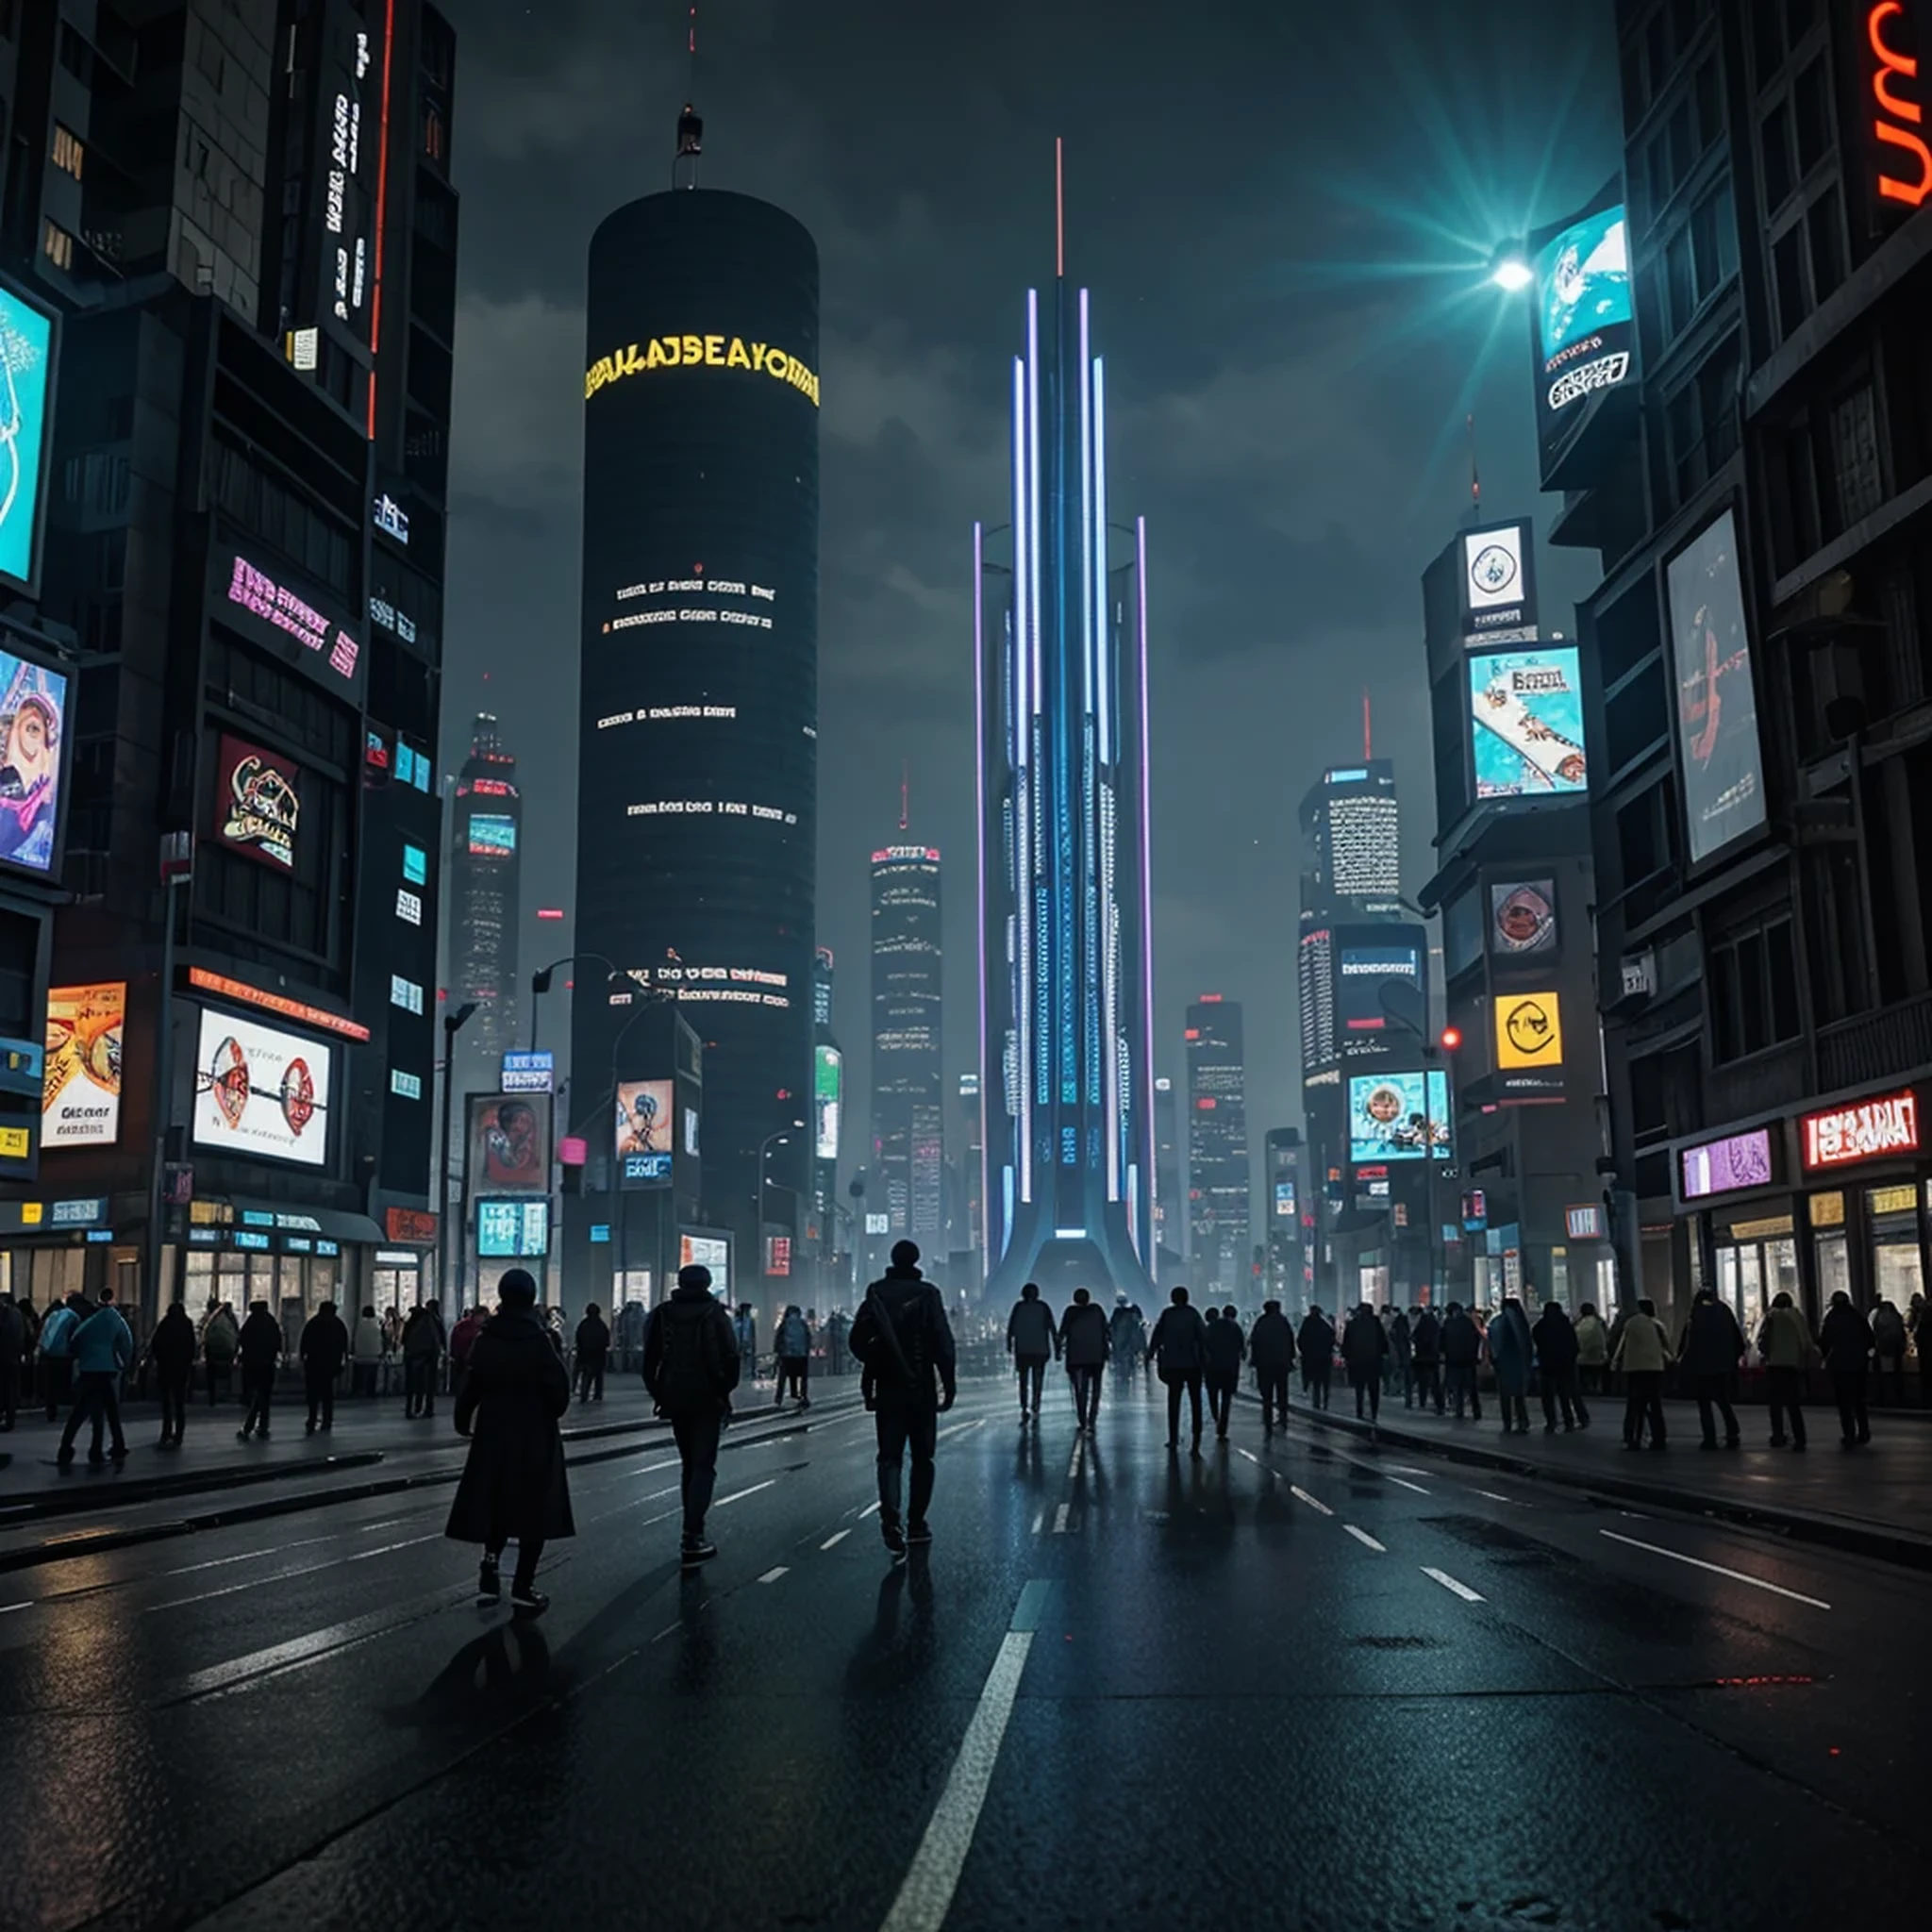 people walking in a city at night with a large clock tower in the background, in a futuristic cyberpunk city, futuristic cyberpunk scenario, arstation and beeple highly, in fantasy sci - fi city, sci-fi cyberpunk city street, busy cyberpunk metropolis, 3 d render beeple, cinematic beeple, cyberpunk city street, in style of beeple